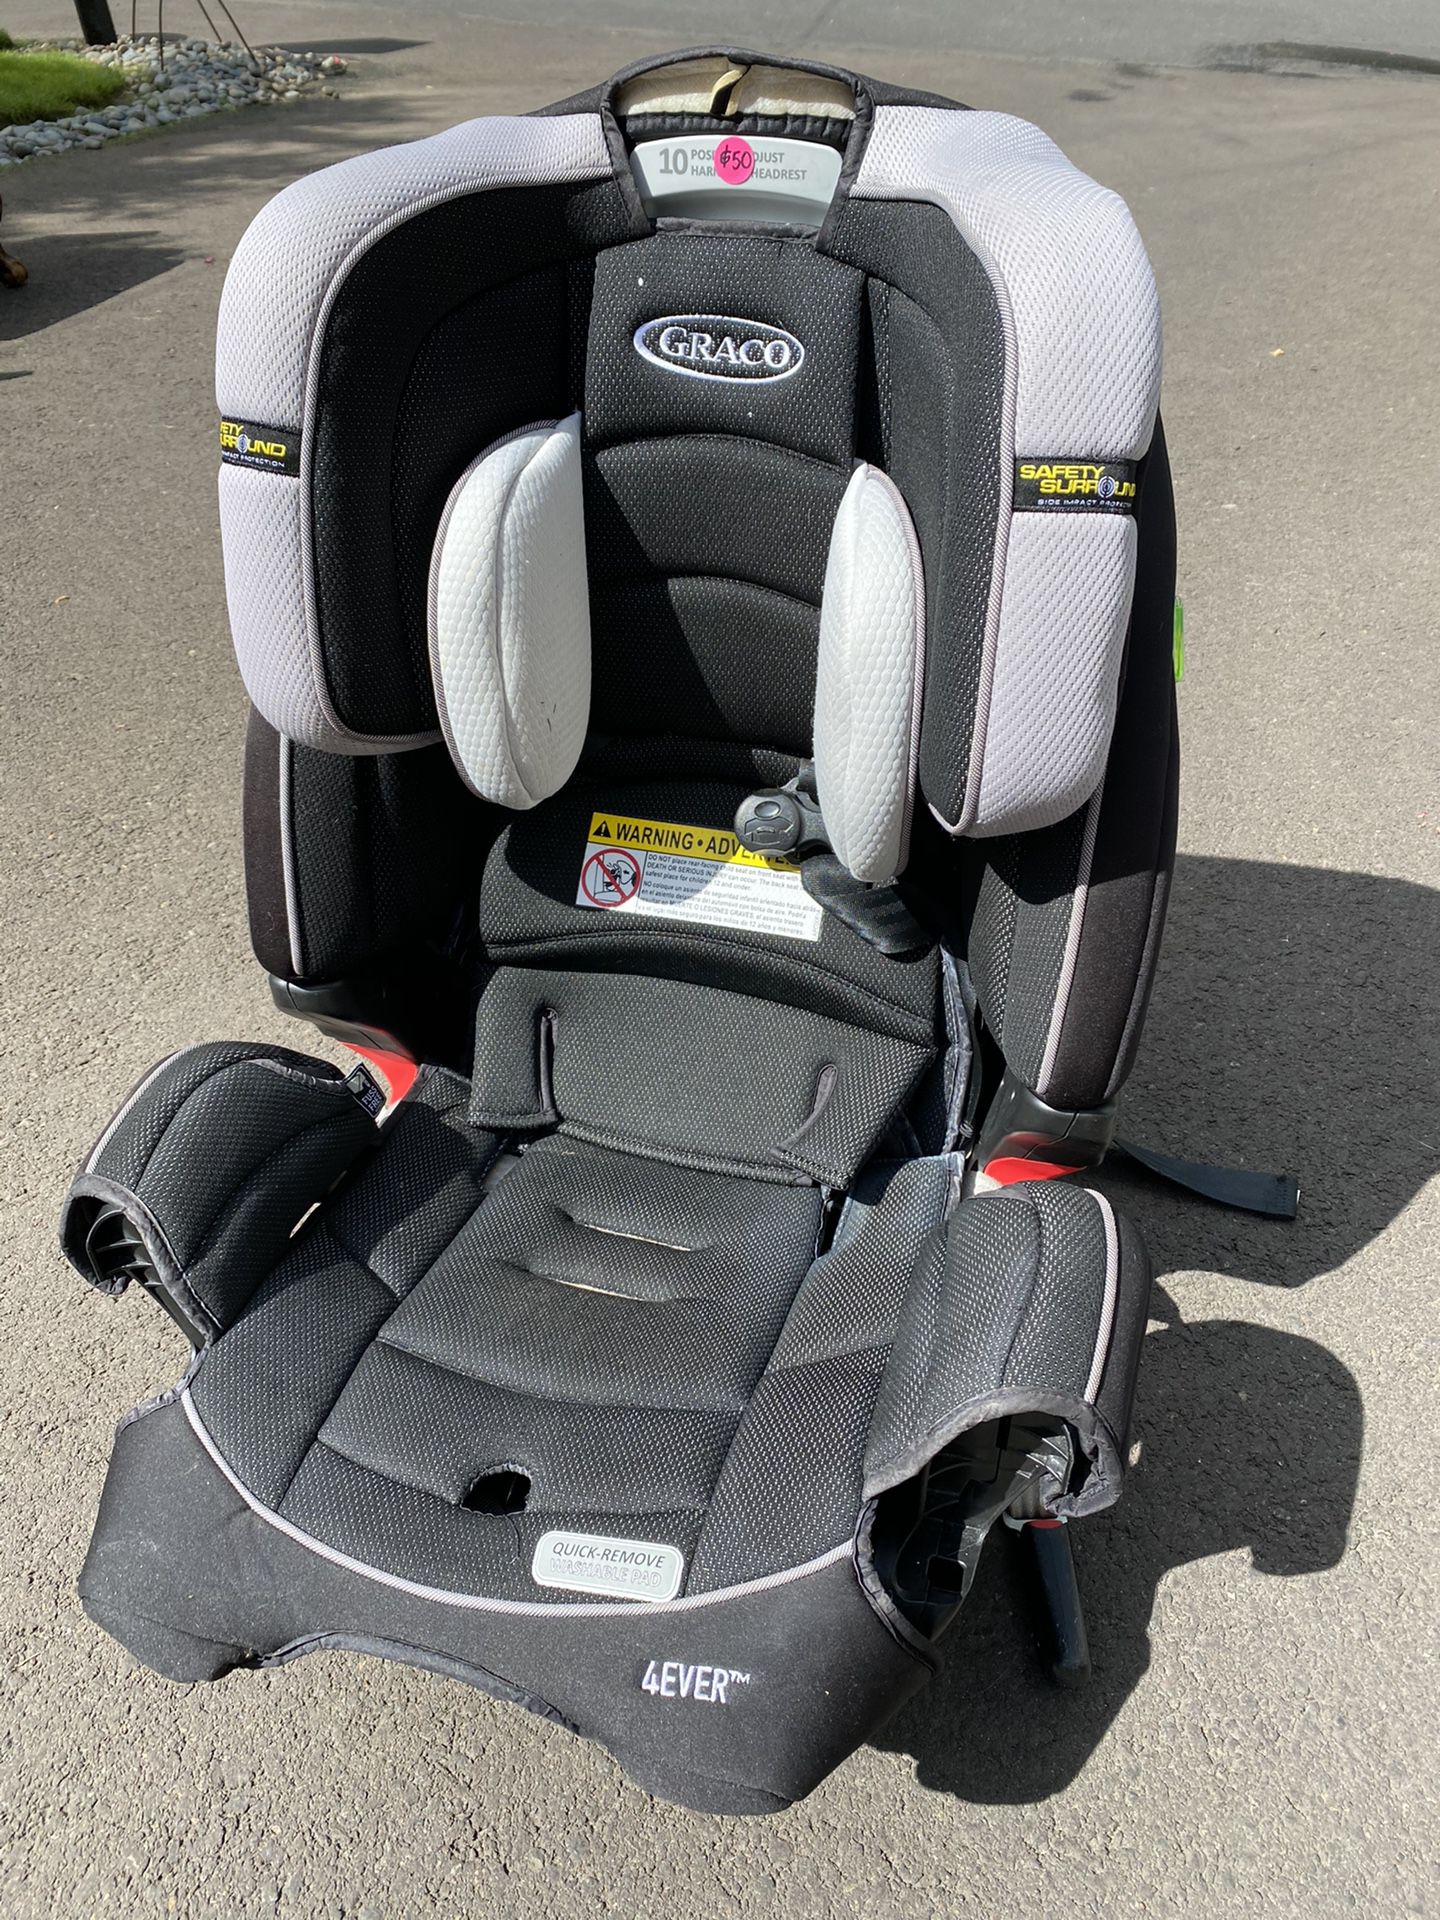 Graco Car seat. Clean and great condition!